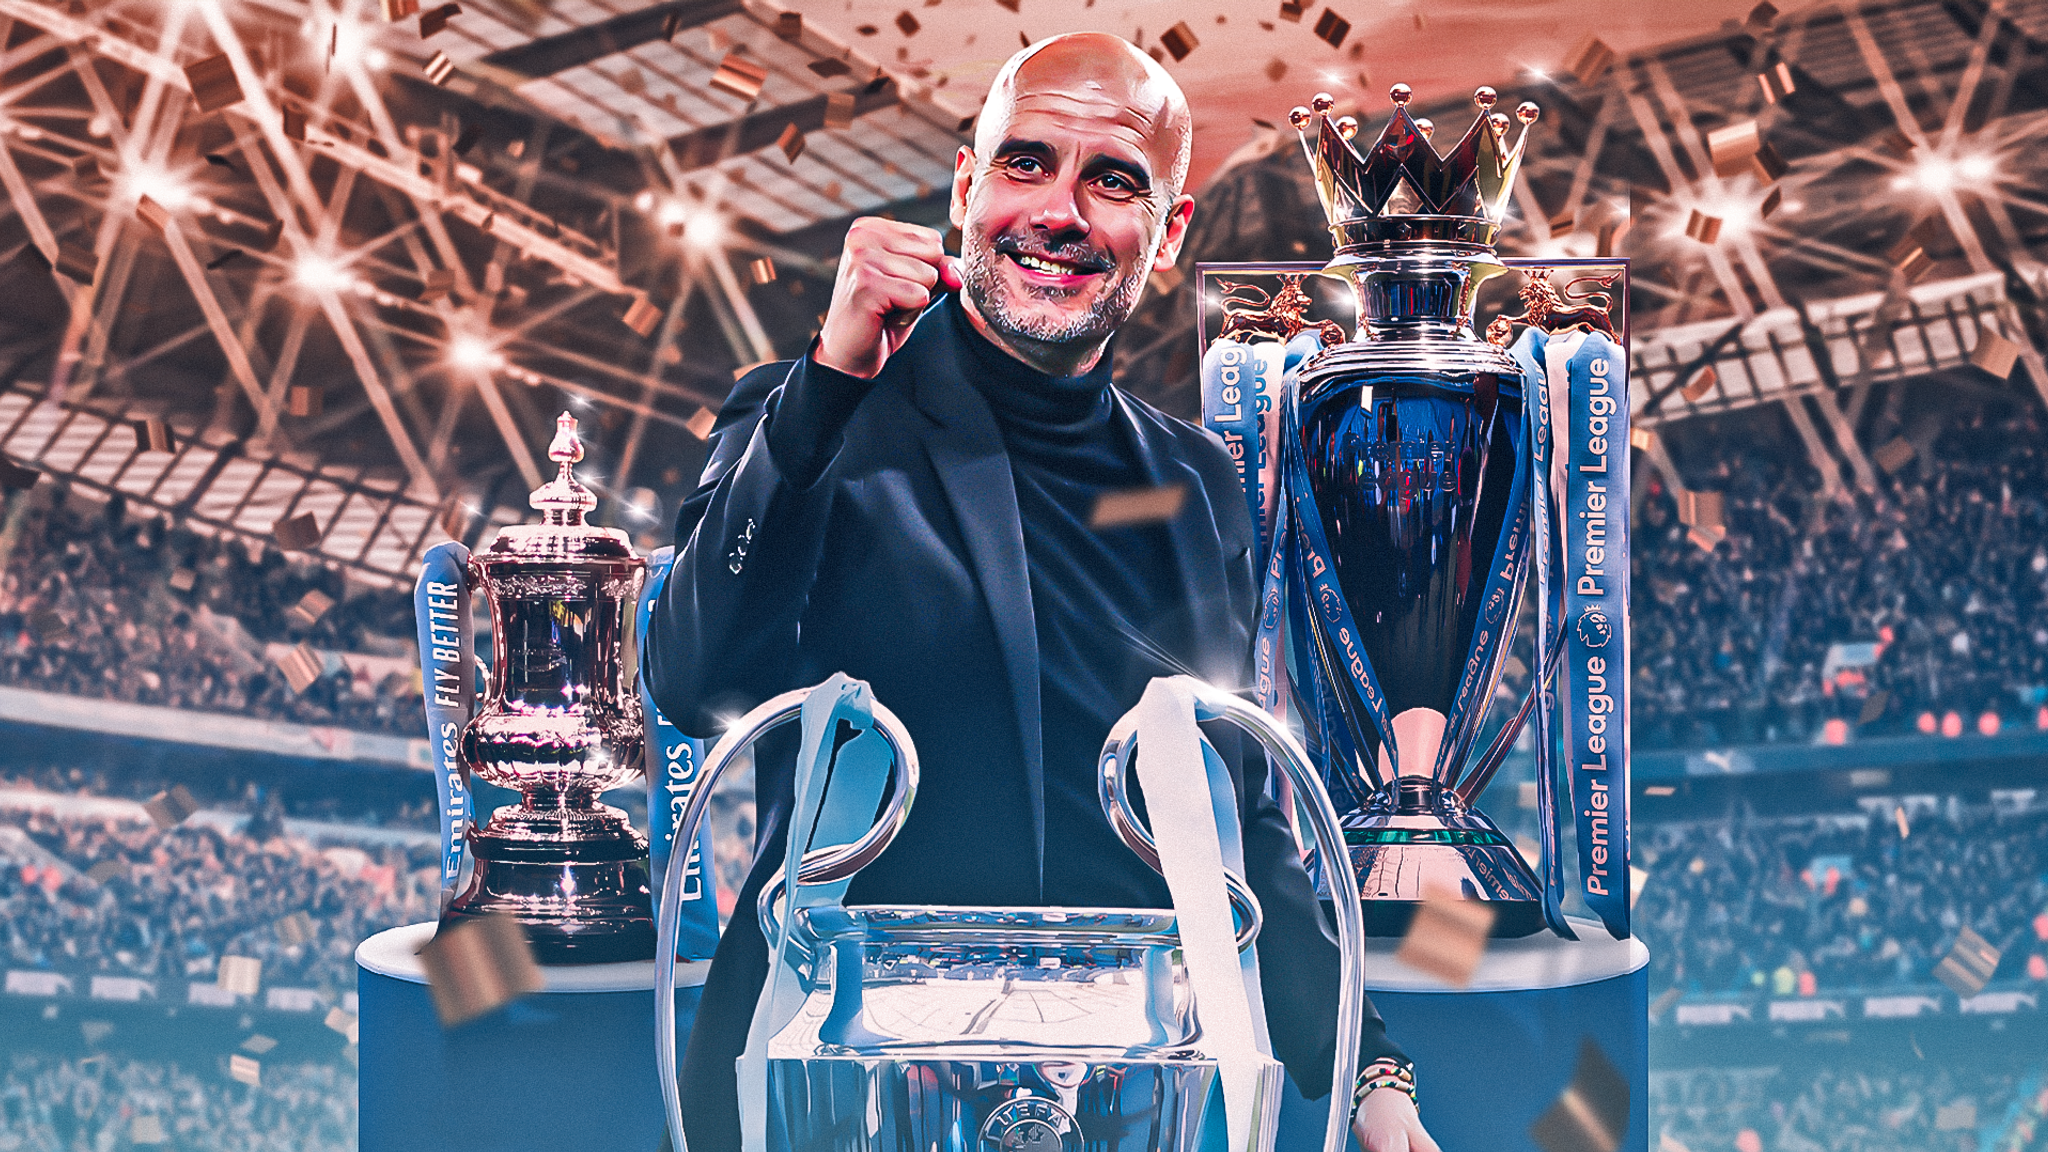 Pep Guardiola with trophies he won with manchester city team